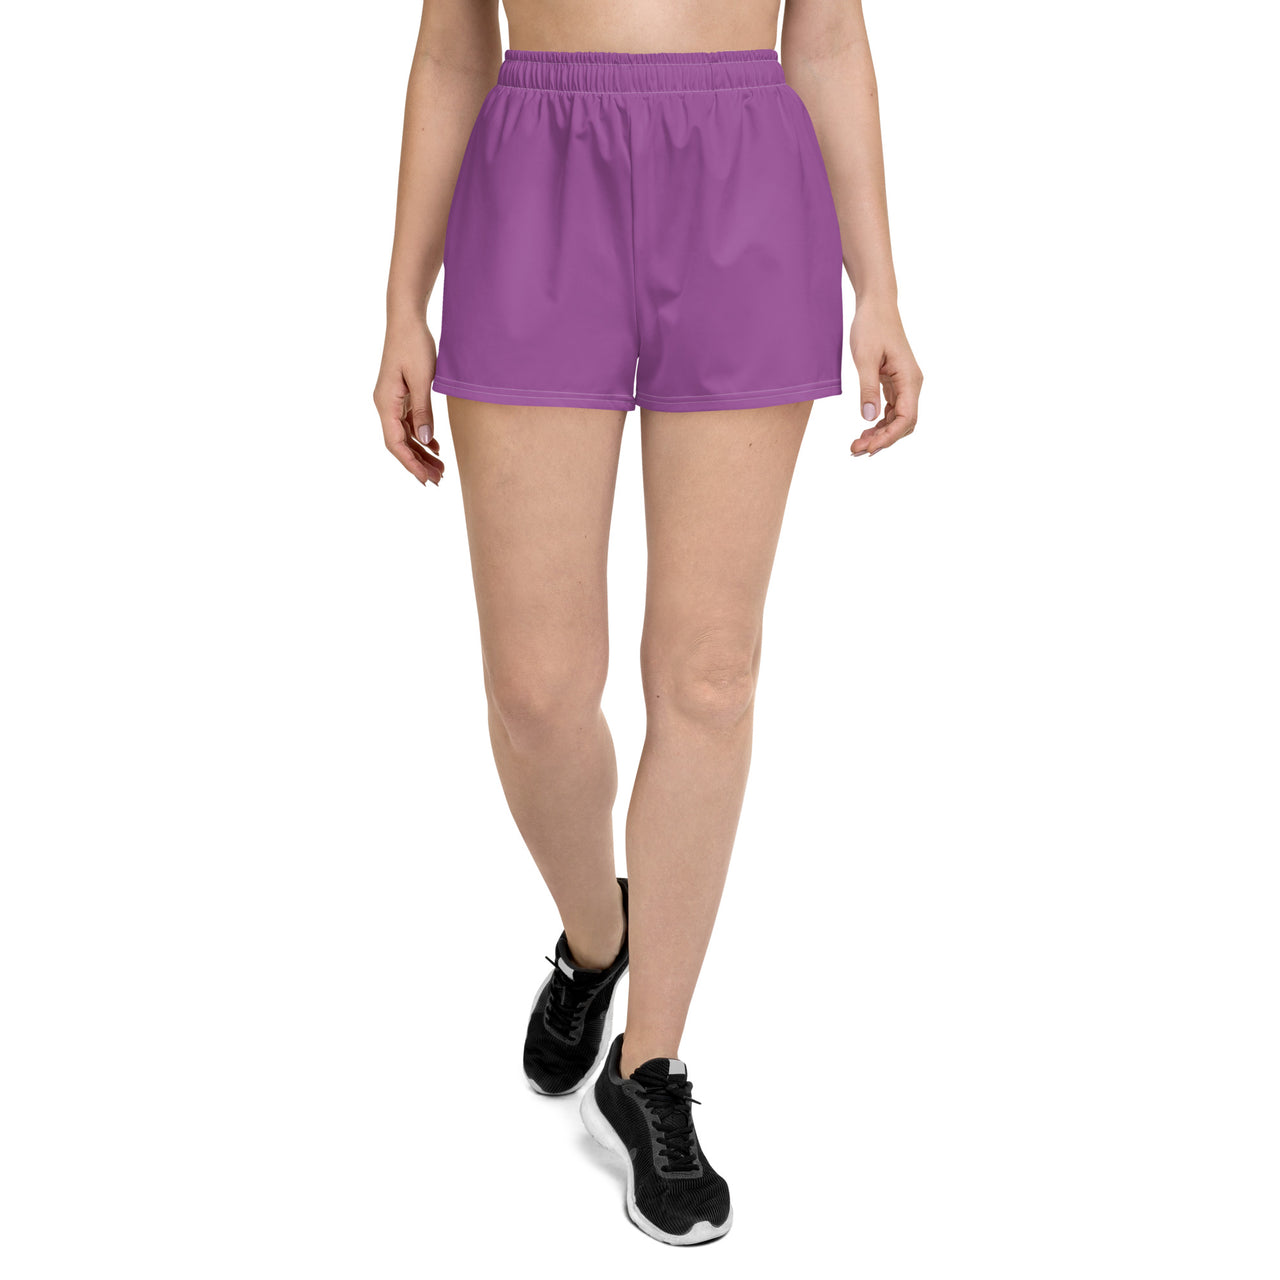 Women’s Recycled Solid Athletic Shorts - Lilac SHAVA CO